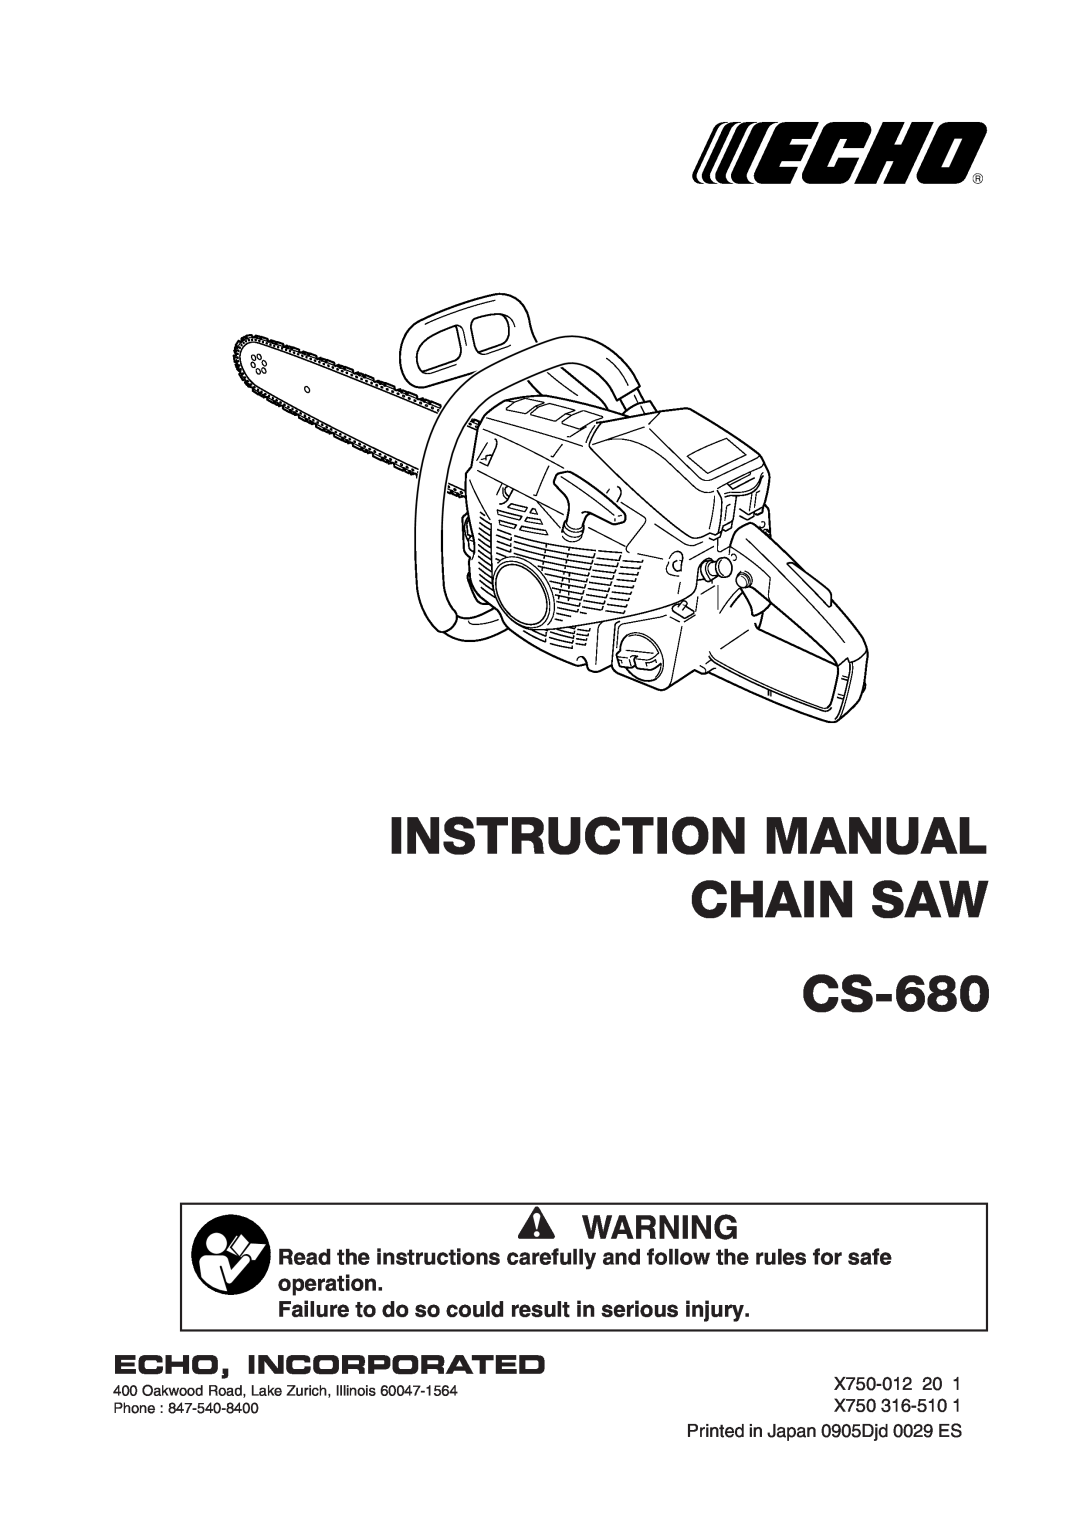 Echo CS-680 instruction manual Echo, Incorporated, Failure to do so could result in serious injury 